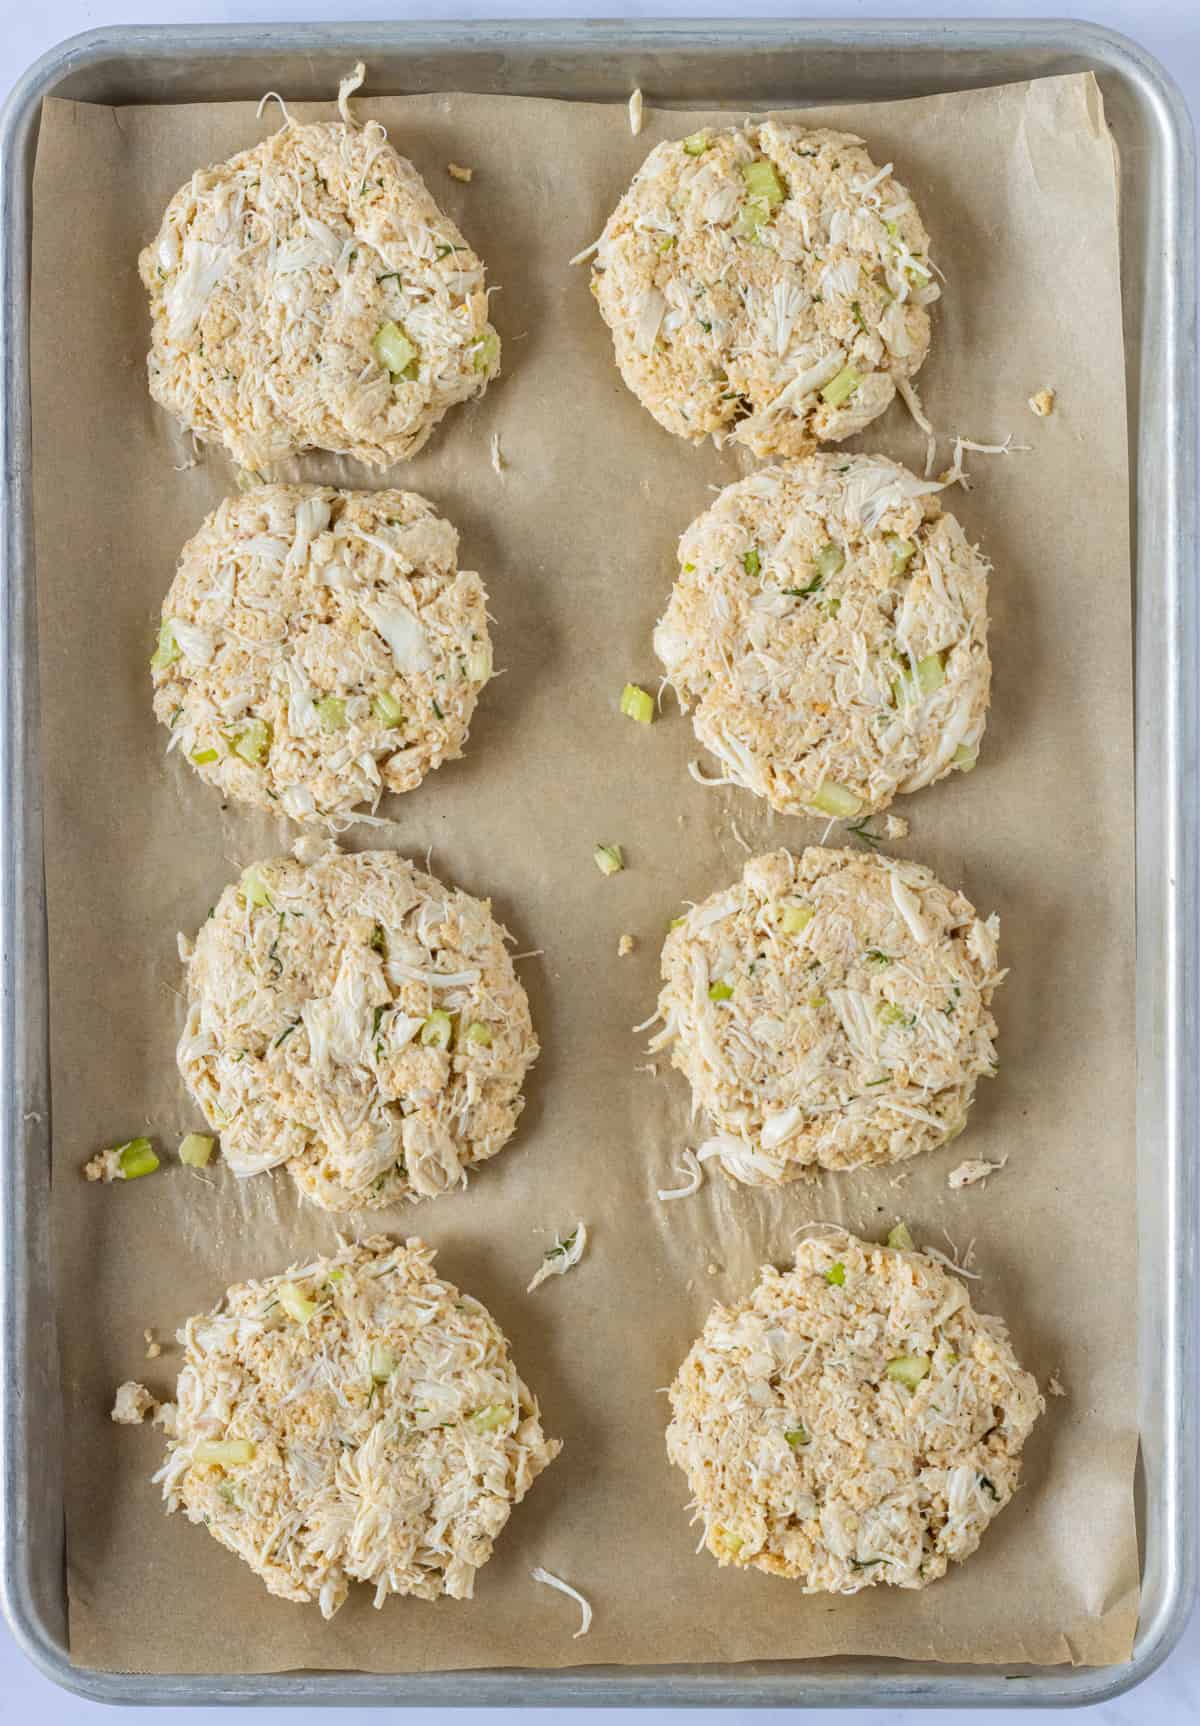 Uncooked crab cake patties on a parchment lined baking sheet.